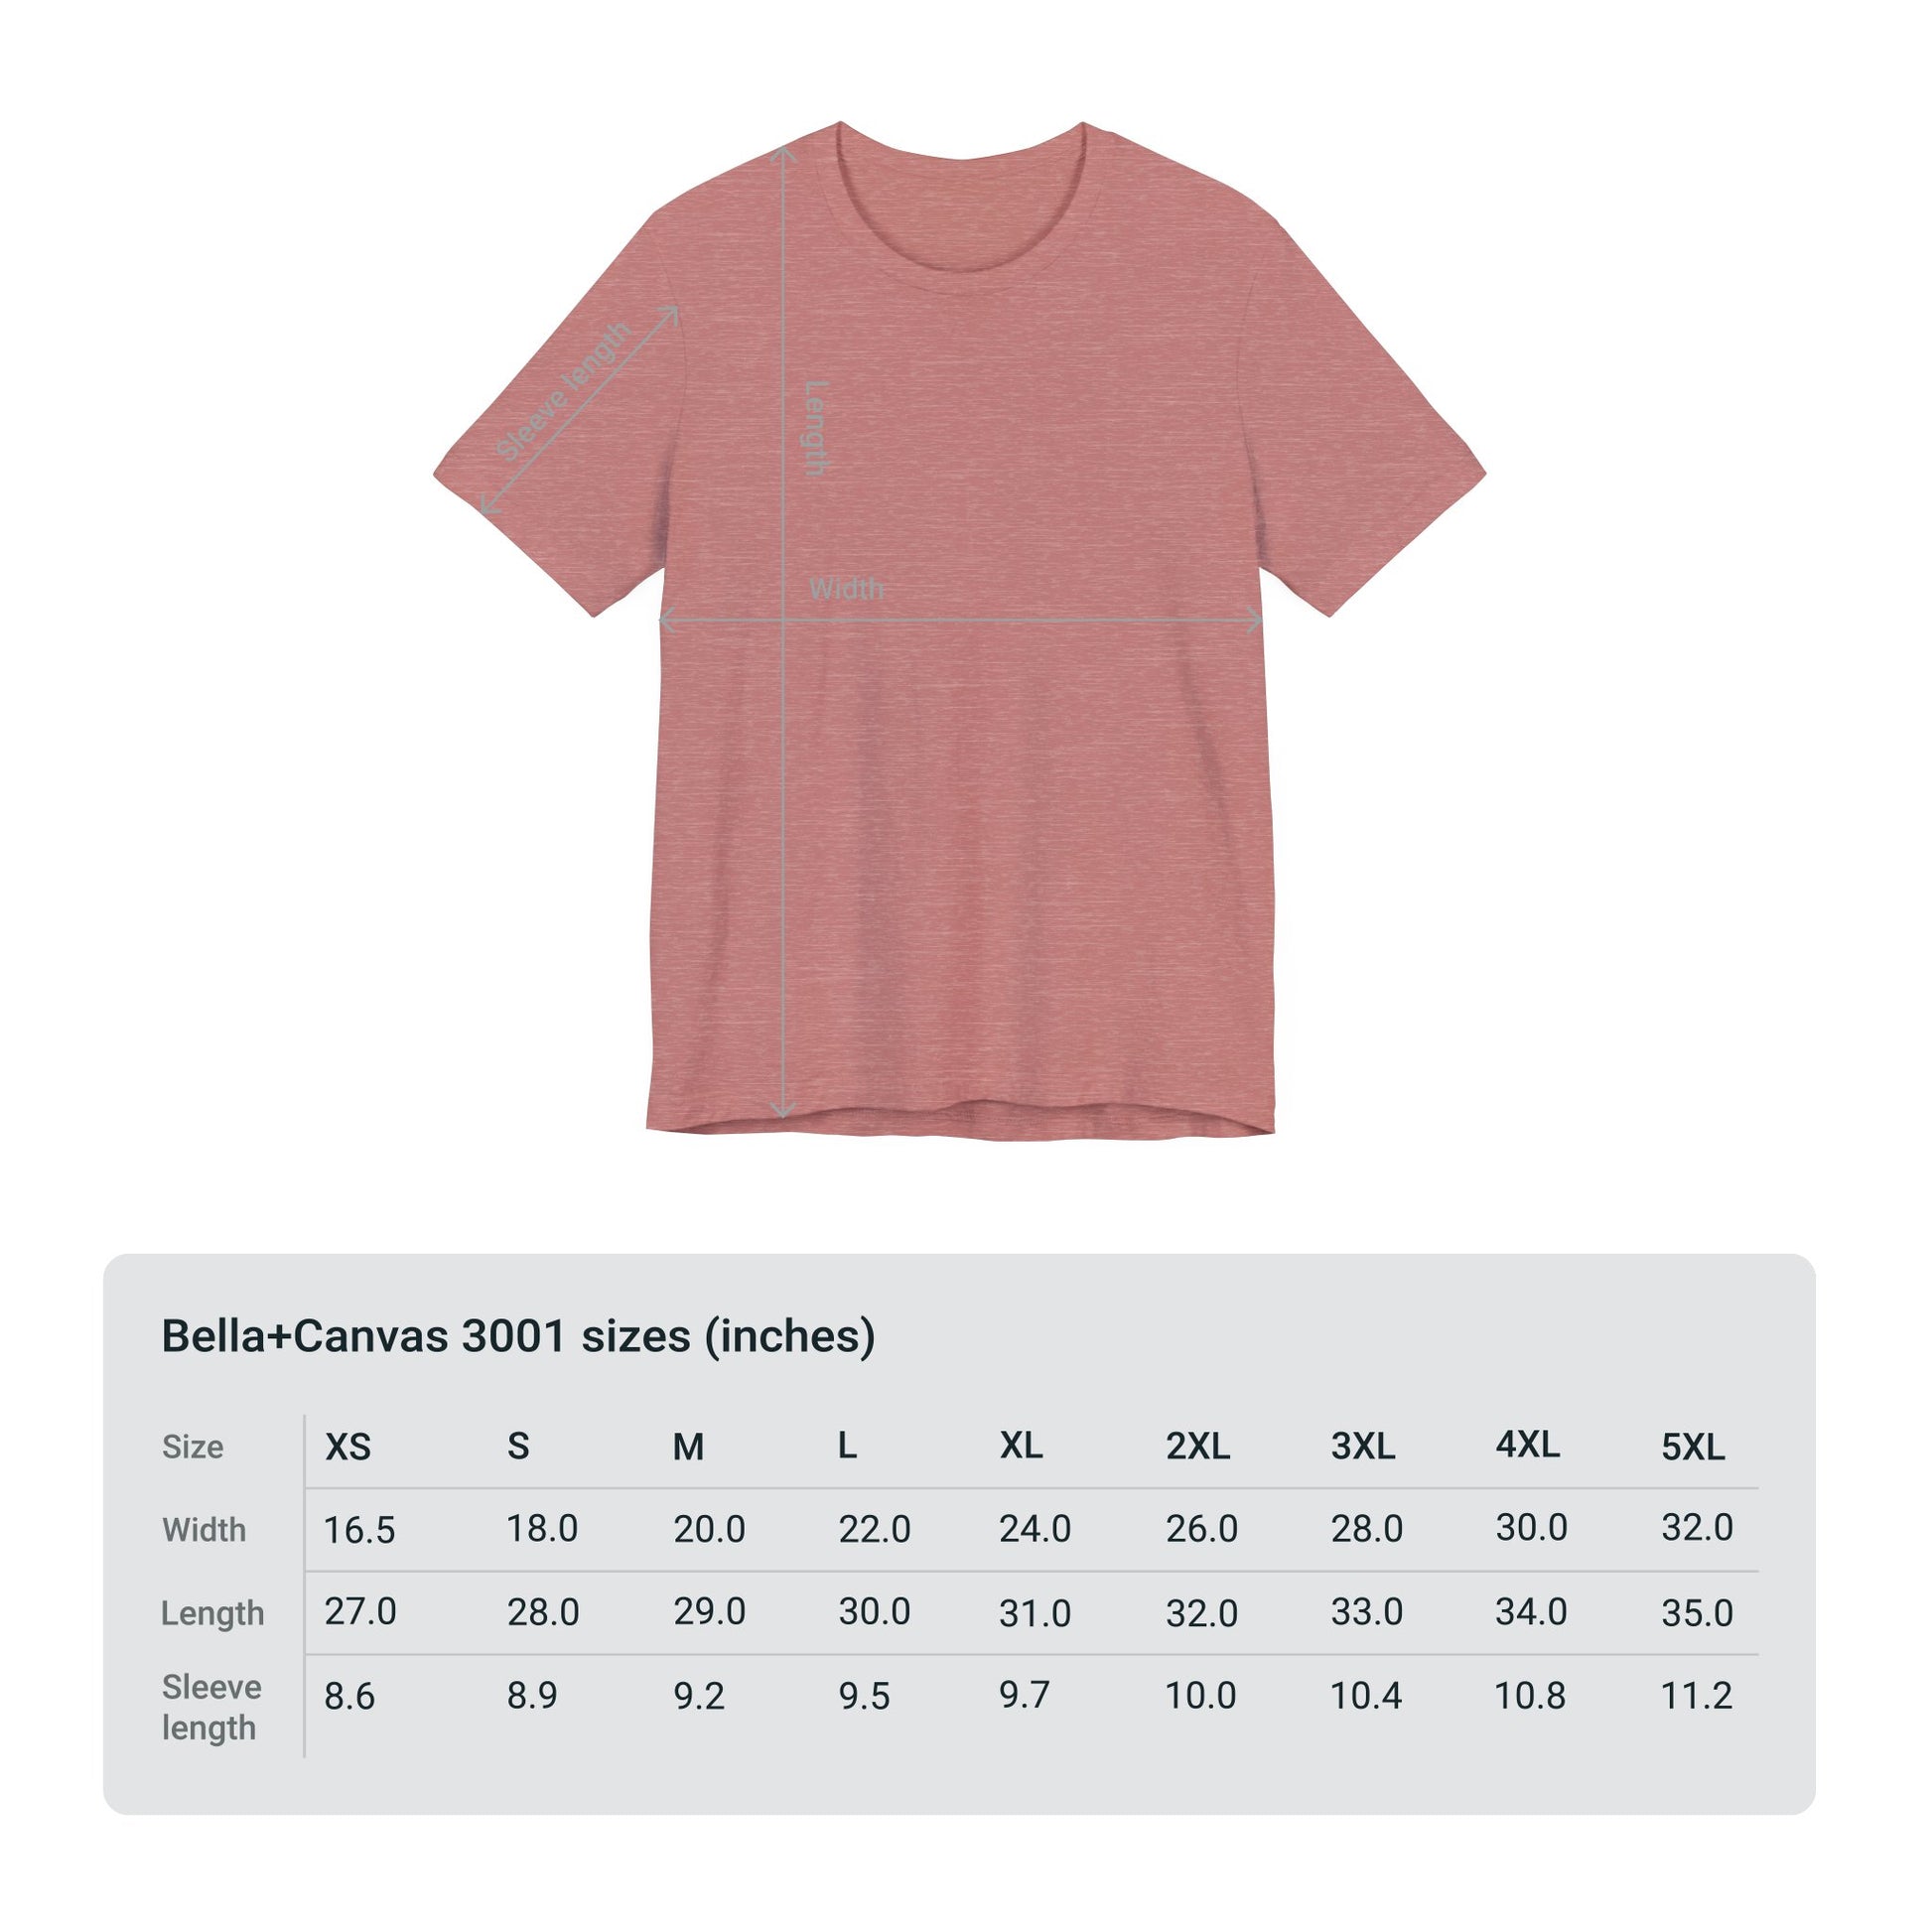 A pink Printify Voting Women's T-shirt displayed flat, annotated with four measurements, accompanied by a sizing chart for the Bella + Canvas 3001 model ranging from XS to 5XL.